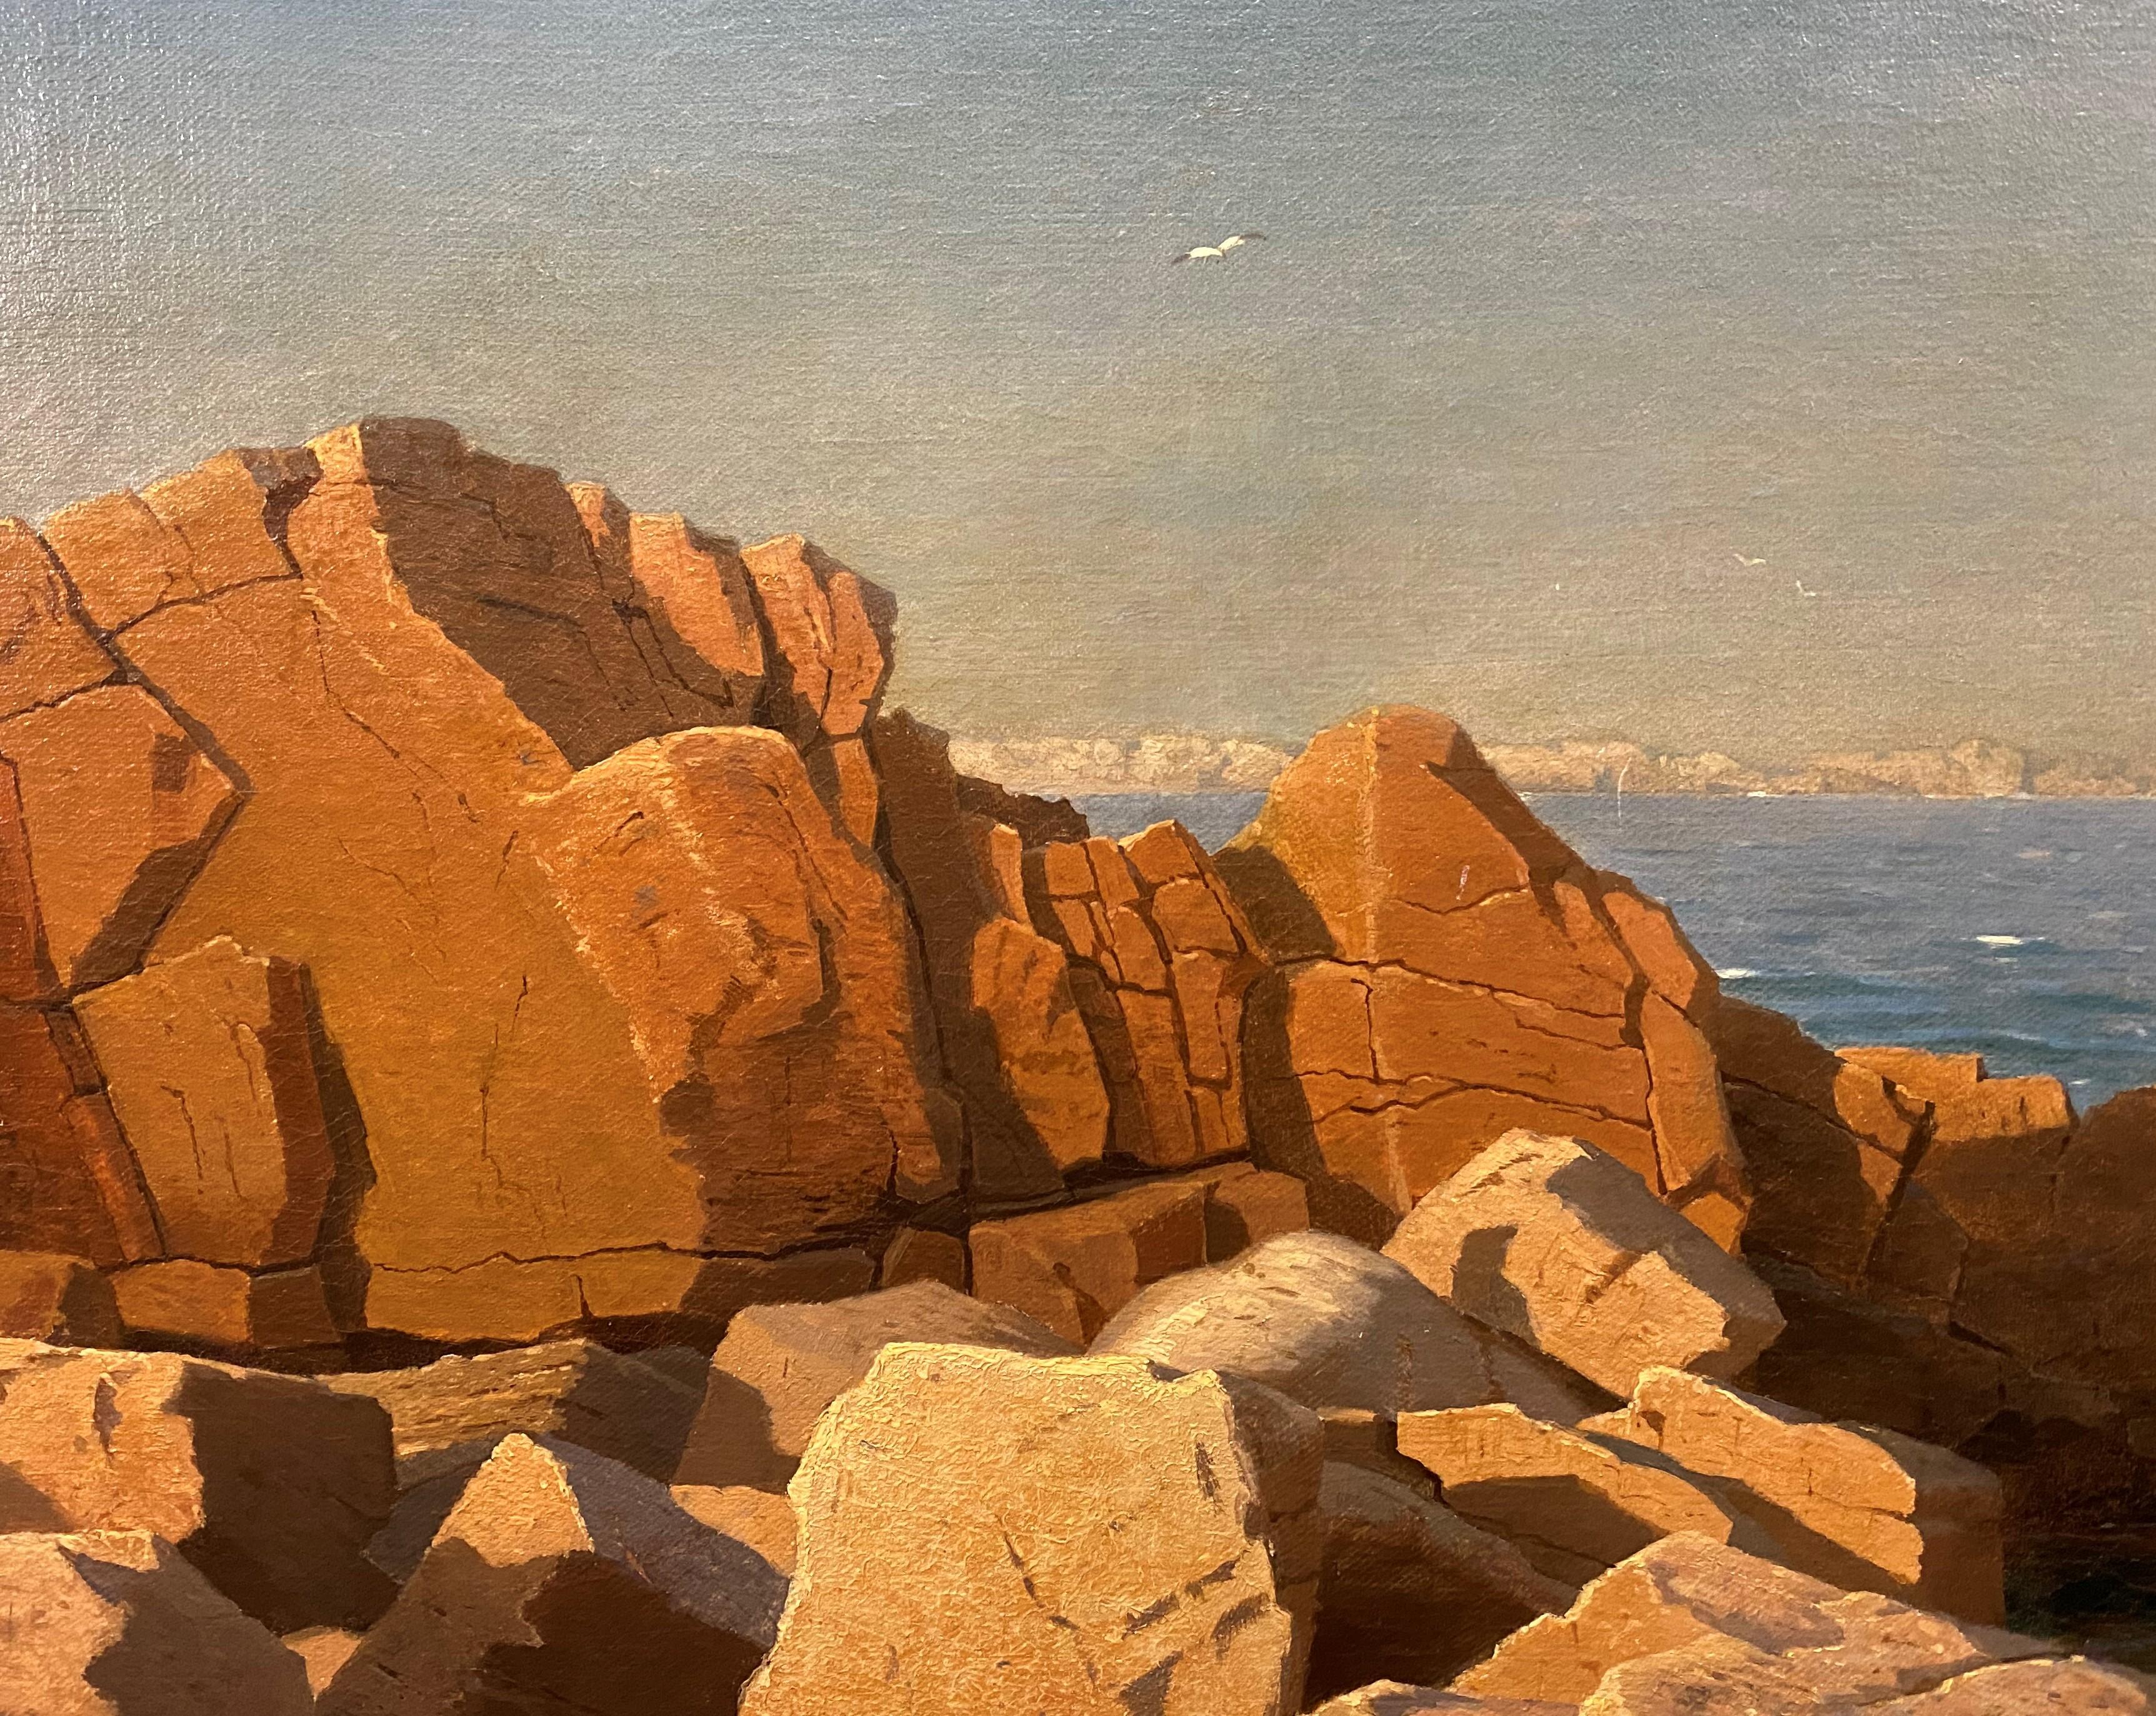 William Stanley Haseltine (1835-1900)
Sunny Afternoon, Newport, Rhode Island, circa 1865
Oil on canvas; 20.25 in H x 39.75 in W, actual; 30.75 in H x 50 in W x 4 in D, framed.
Provenance: Private collection, Bedford, New York
Painting is accompanied